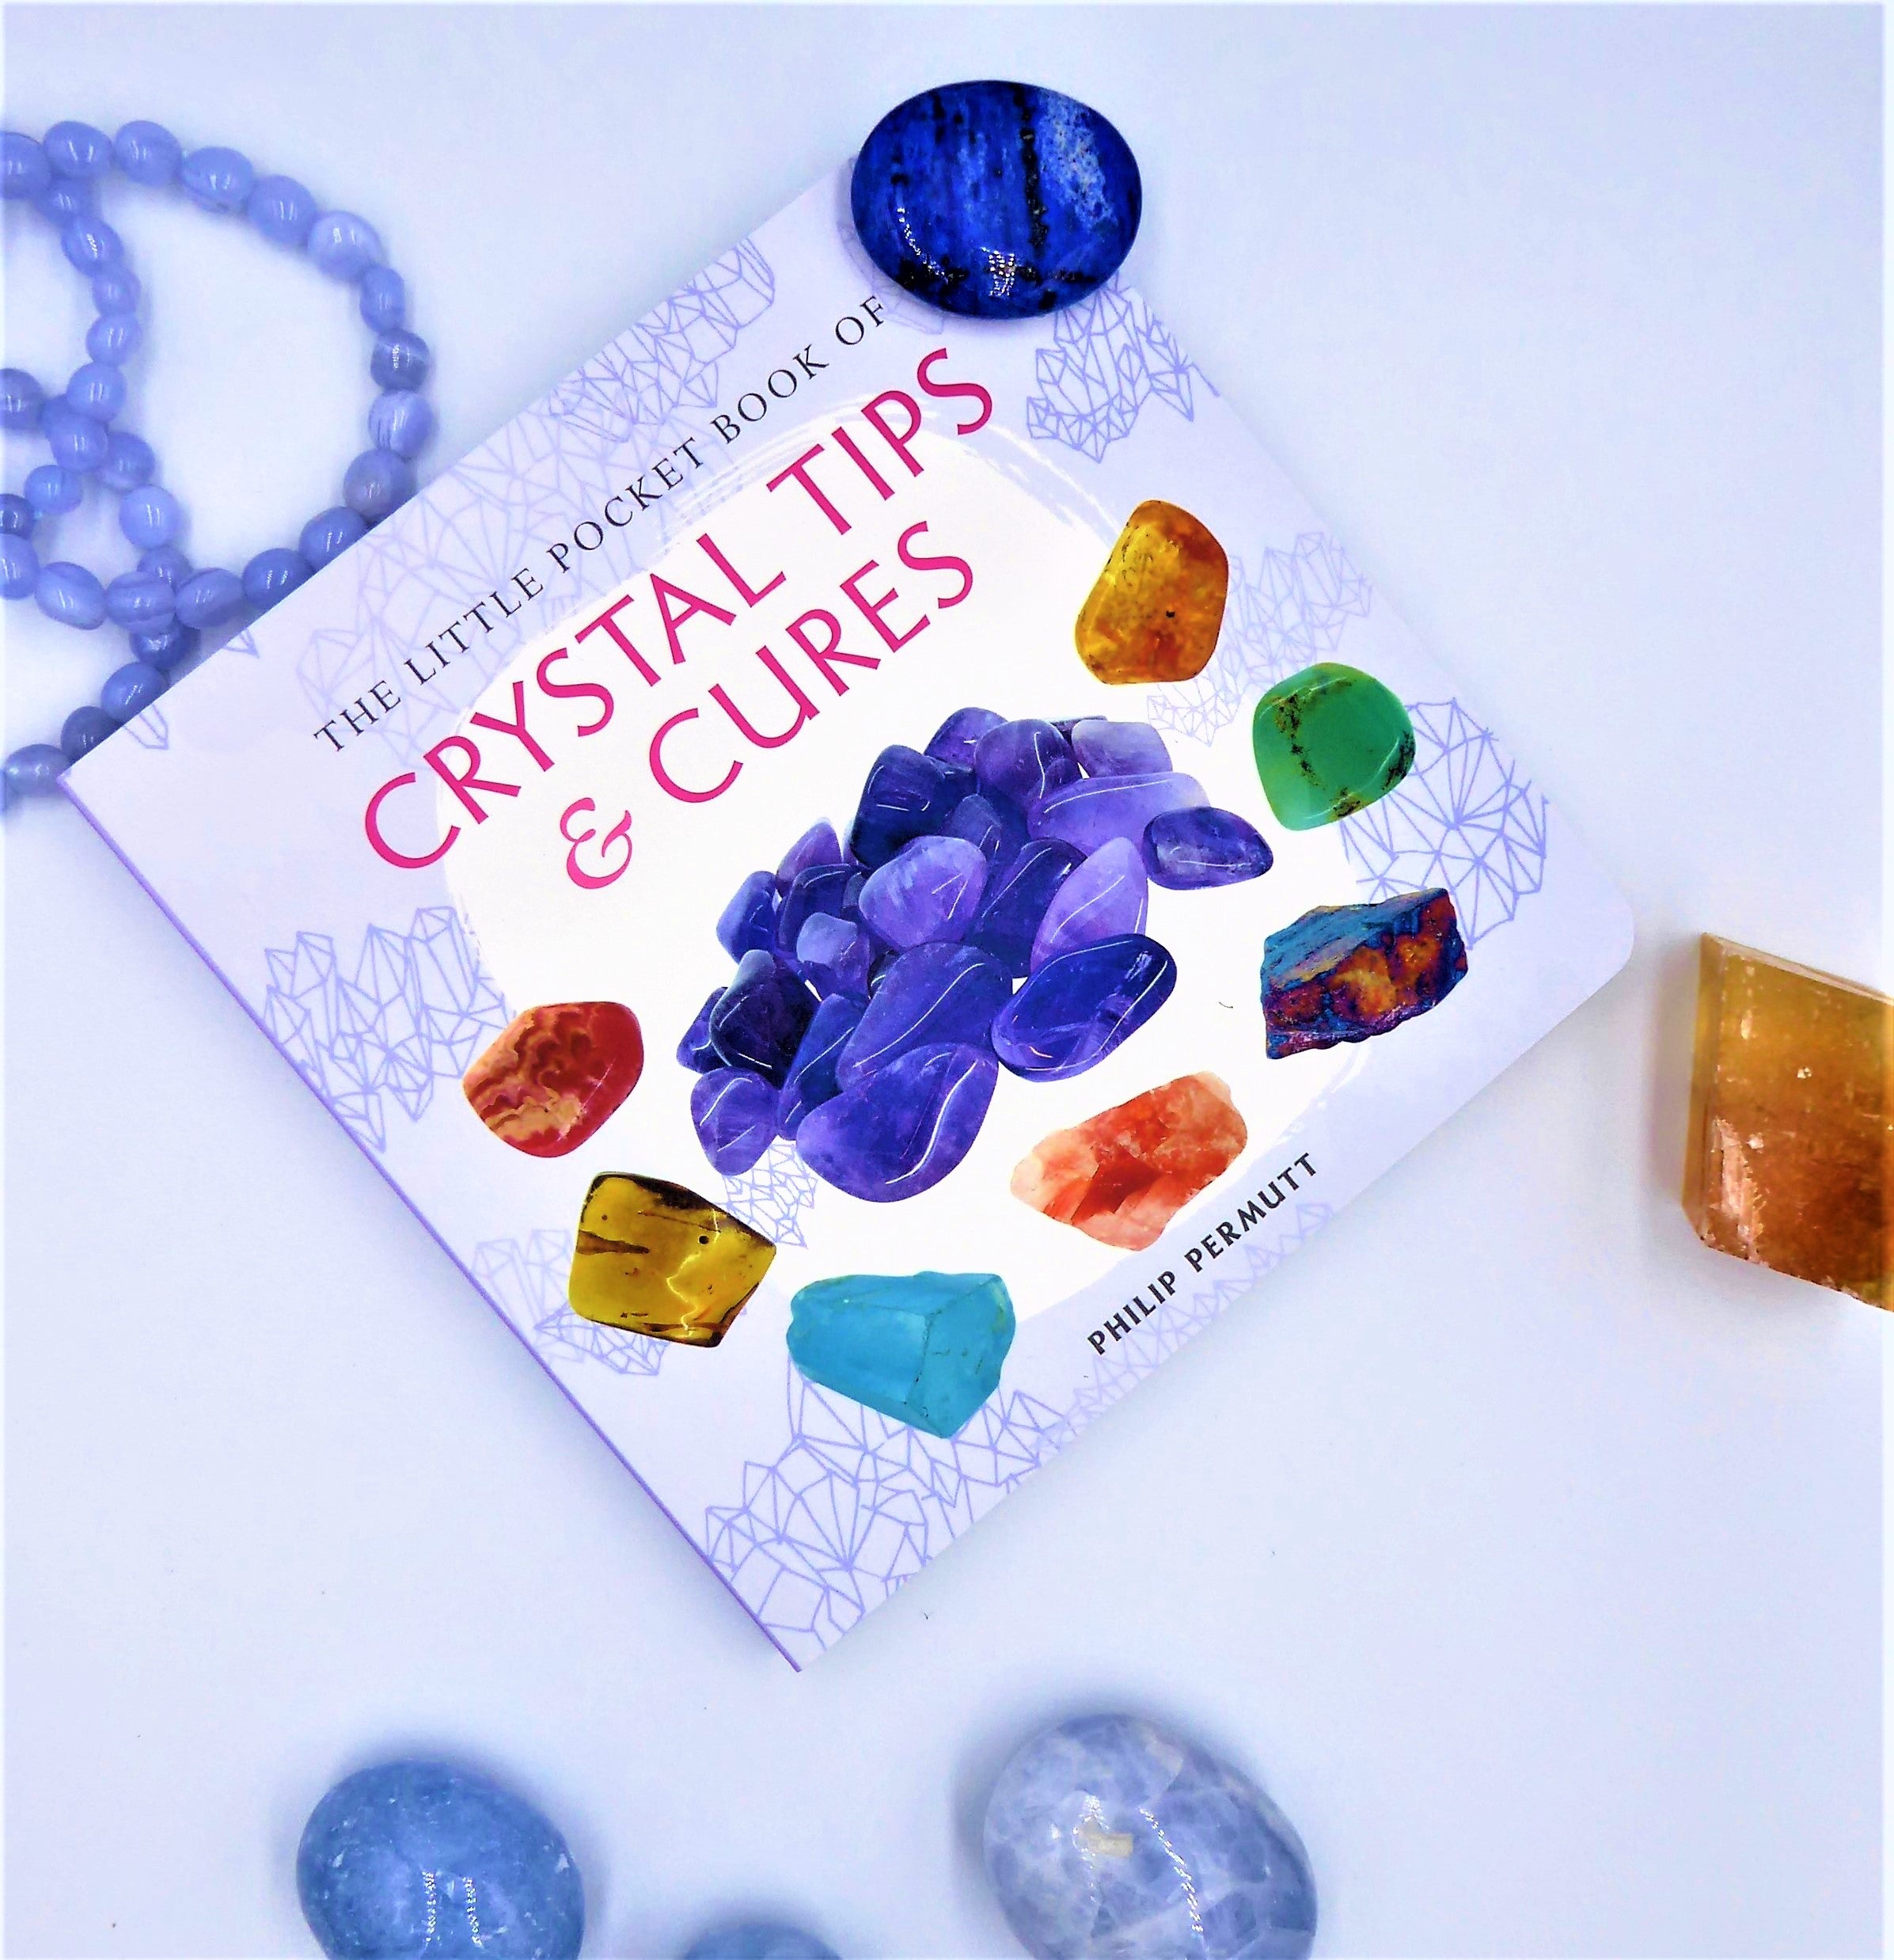 Little Pocket Book of Crystal Tips and Cures